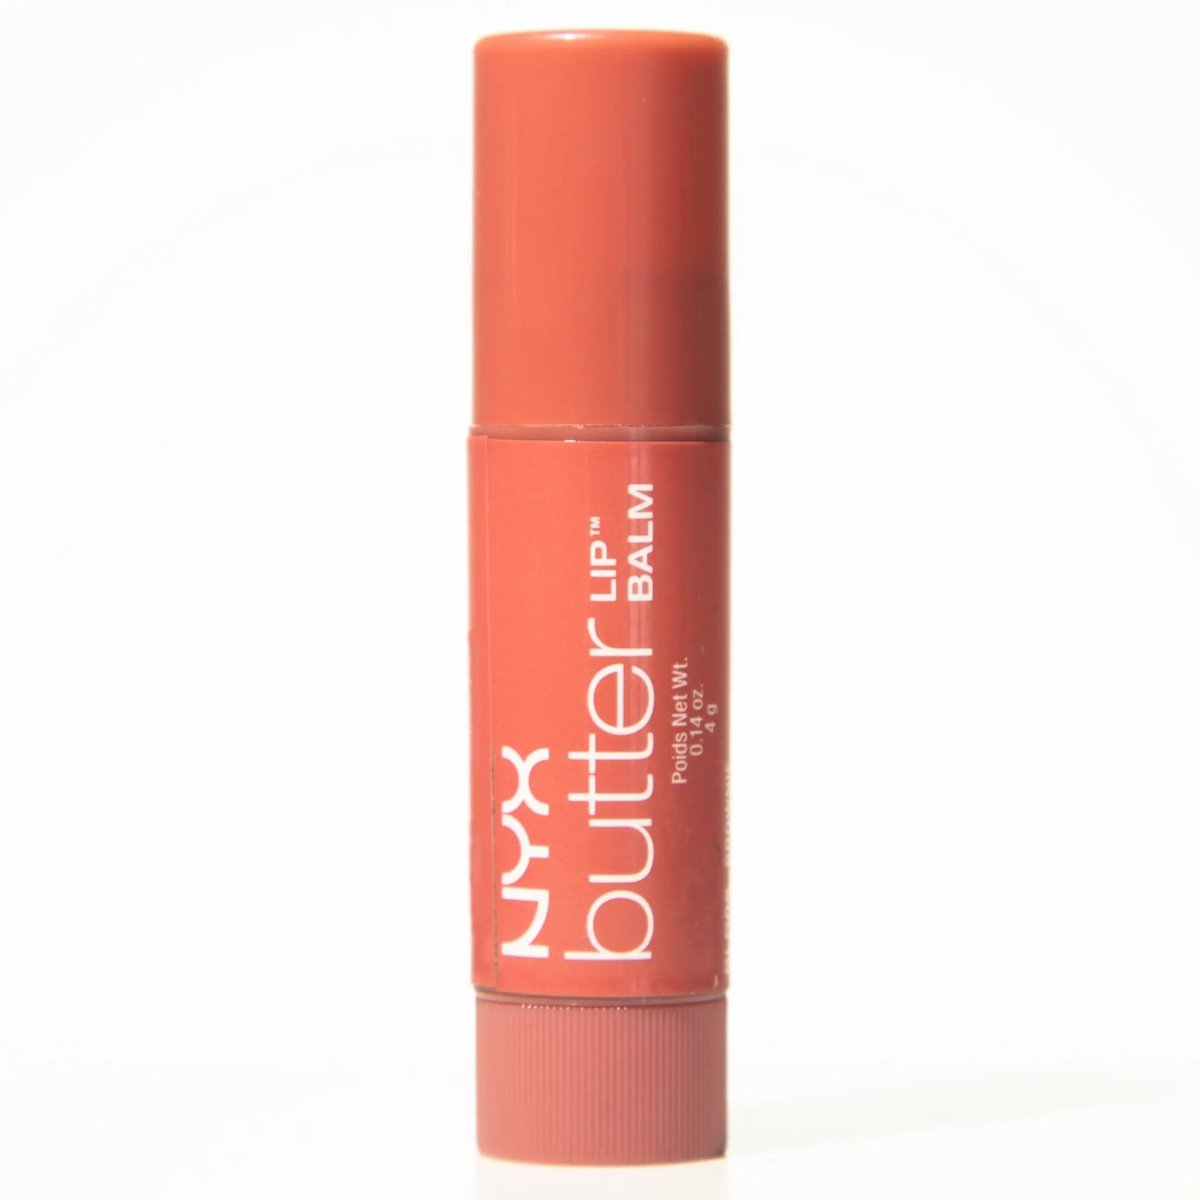 Image of NYX Butter Lip Balm